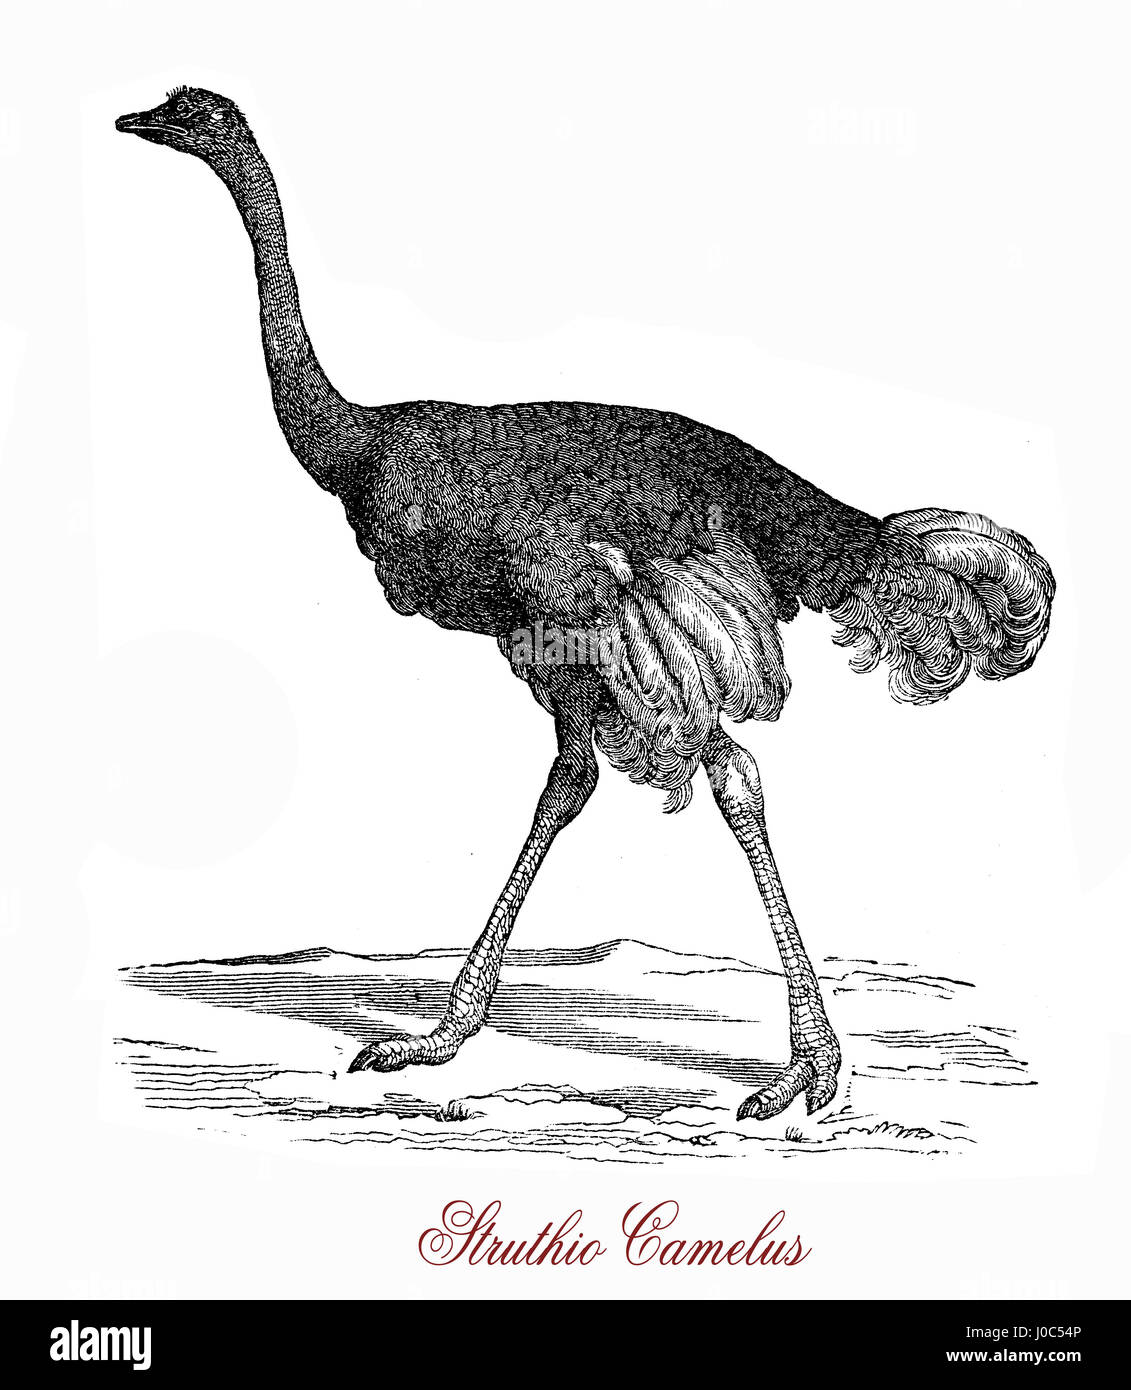 The ostrich (Struthio camelus) is  a large flightless birds native to Africa. It can run at up to about 70 km/h (19 m/s; 43 mph), the fastest land speed of any bird. The ostrich is the largest living species of bird and lays the largest eggs of any living bird. Stock Photo